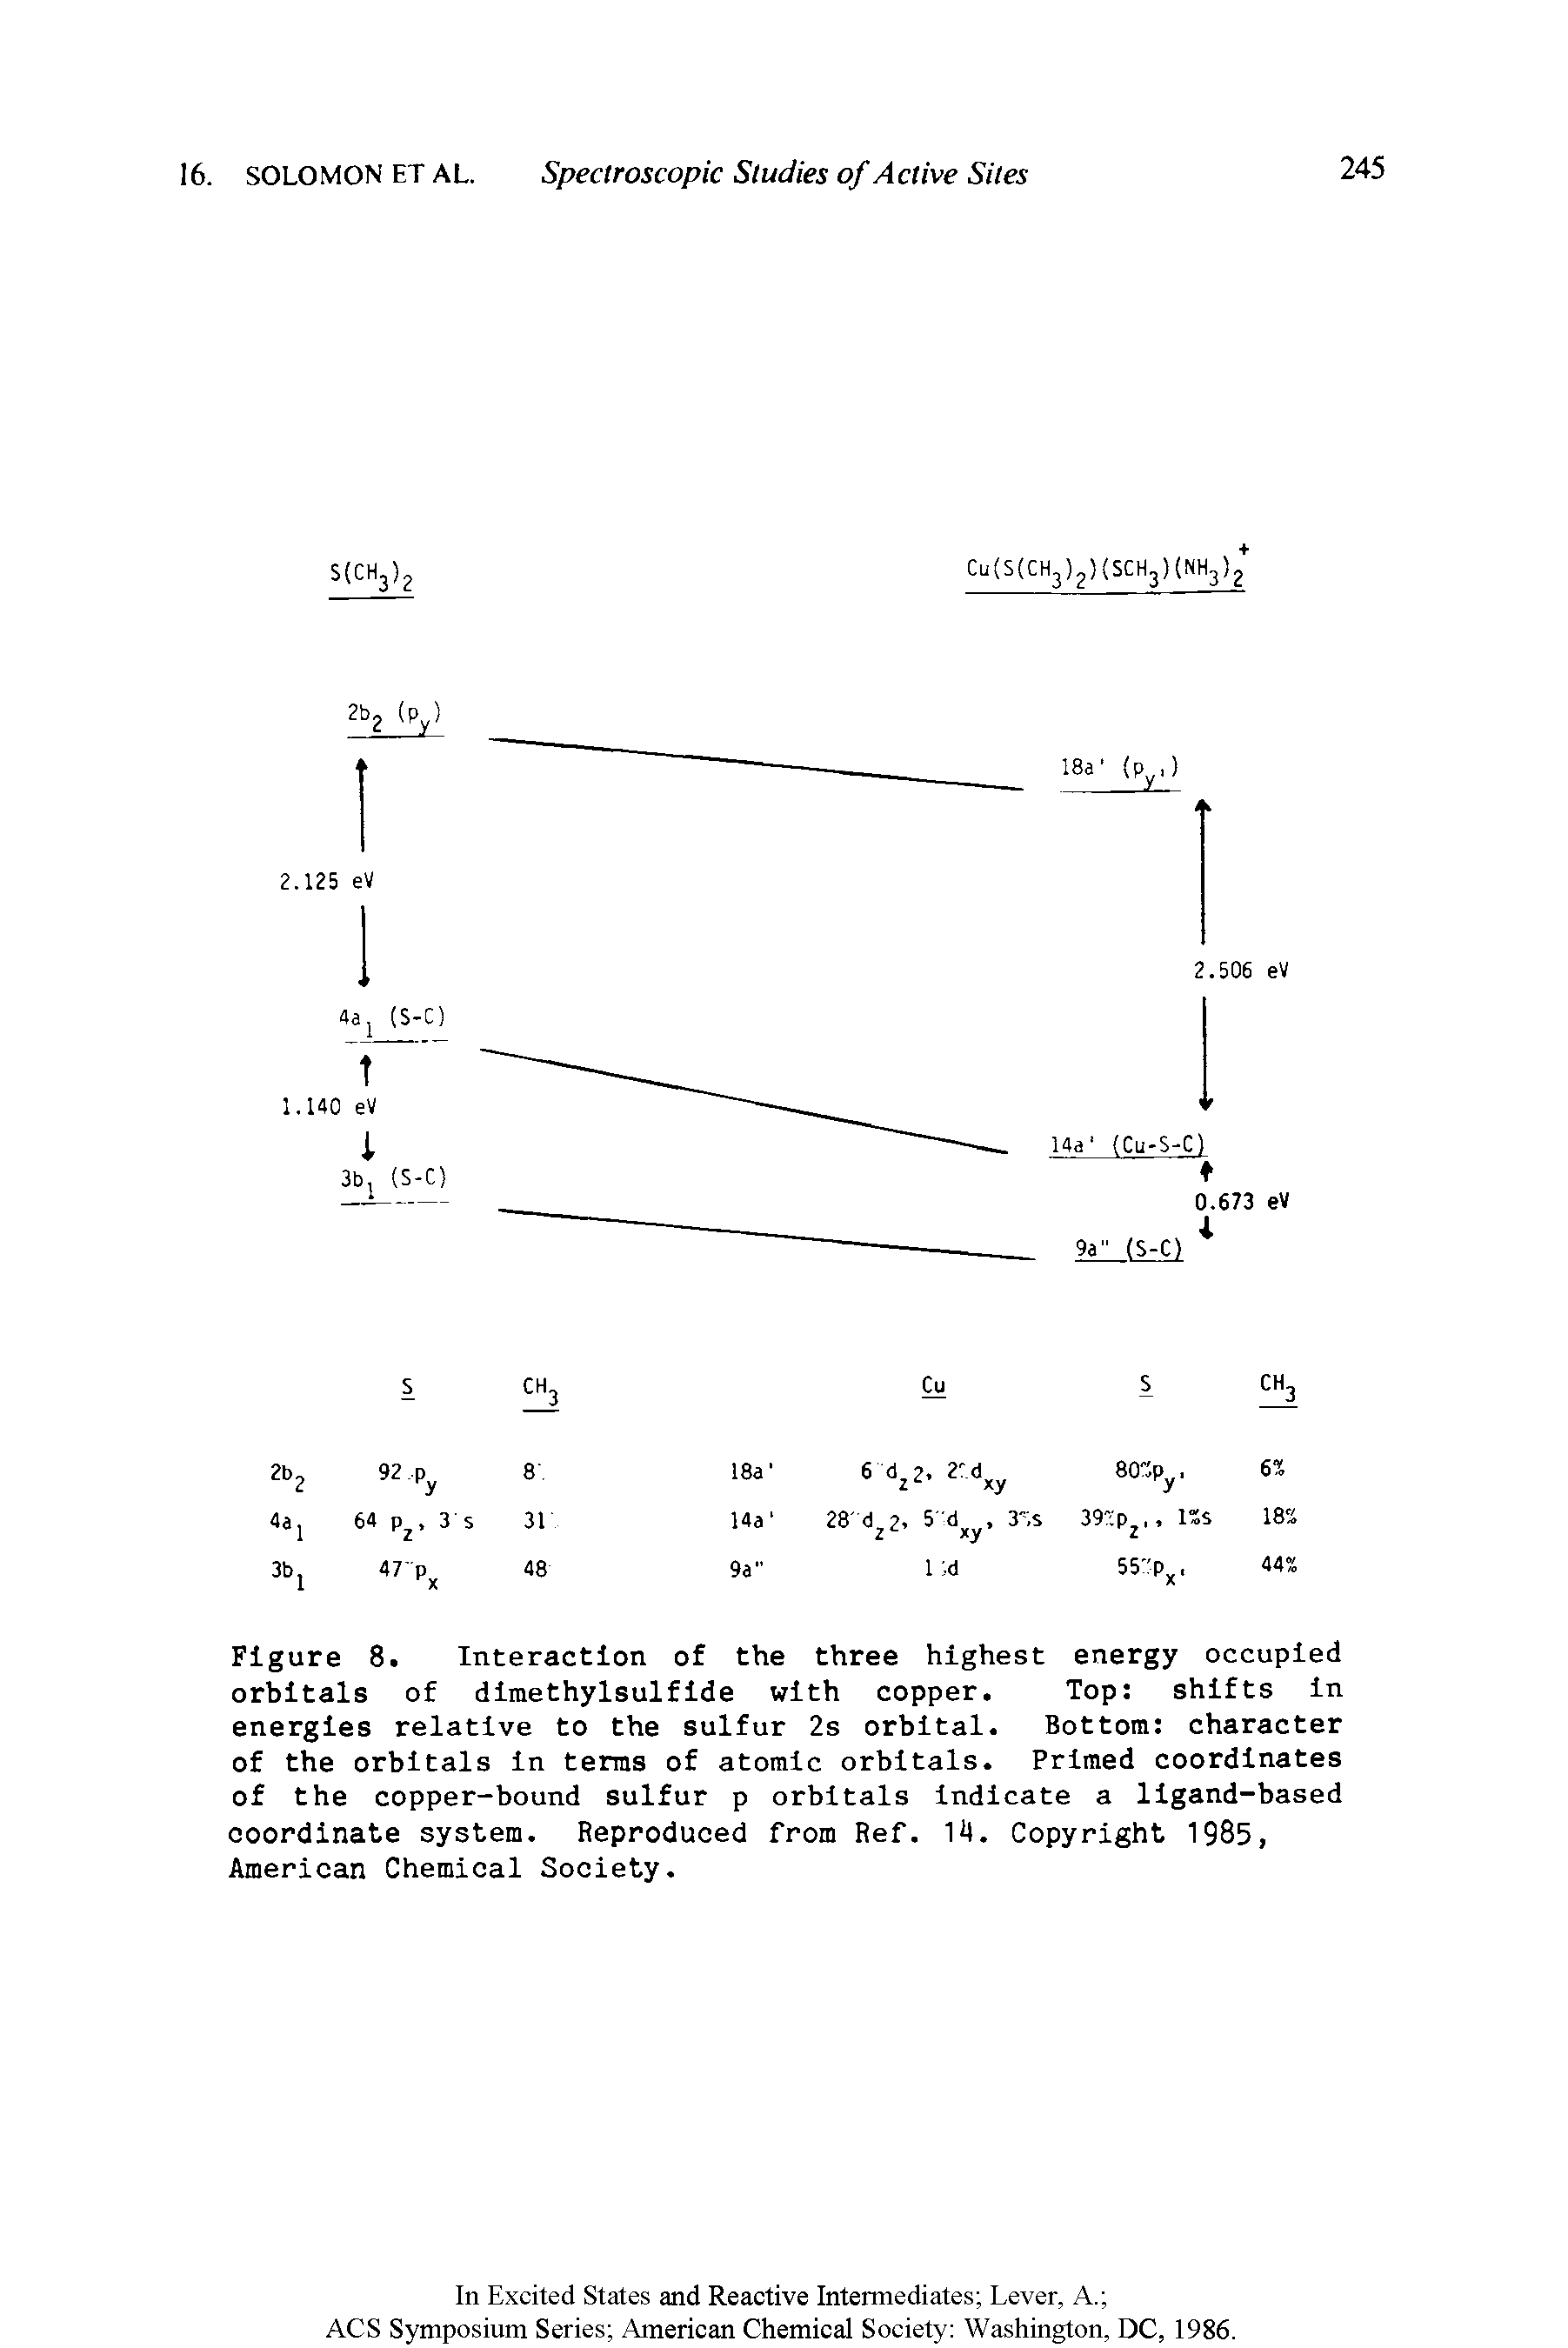 Figure 8. Interaction of the three highest energy occupied orbitals of dimethylsulfide with copper. Top shifts in energies relative to the sulfur 2s orbital. Bottom character of the orbitals in terms of atomic orbitals. Primed coordinates of the copper-bound sulfur p orbitals indicate a ligand-based coordinate system. Reproduced from Ref. 14. Copyright 1985, American Chemical Society.